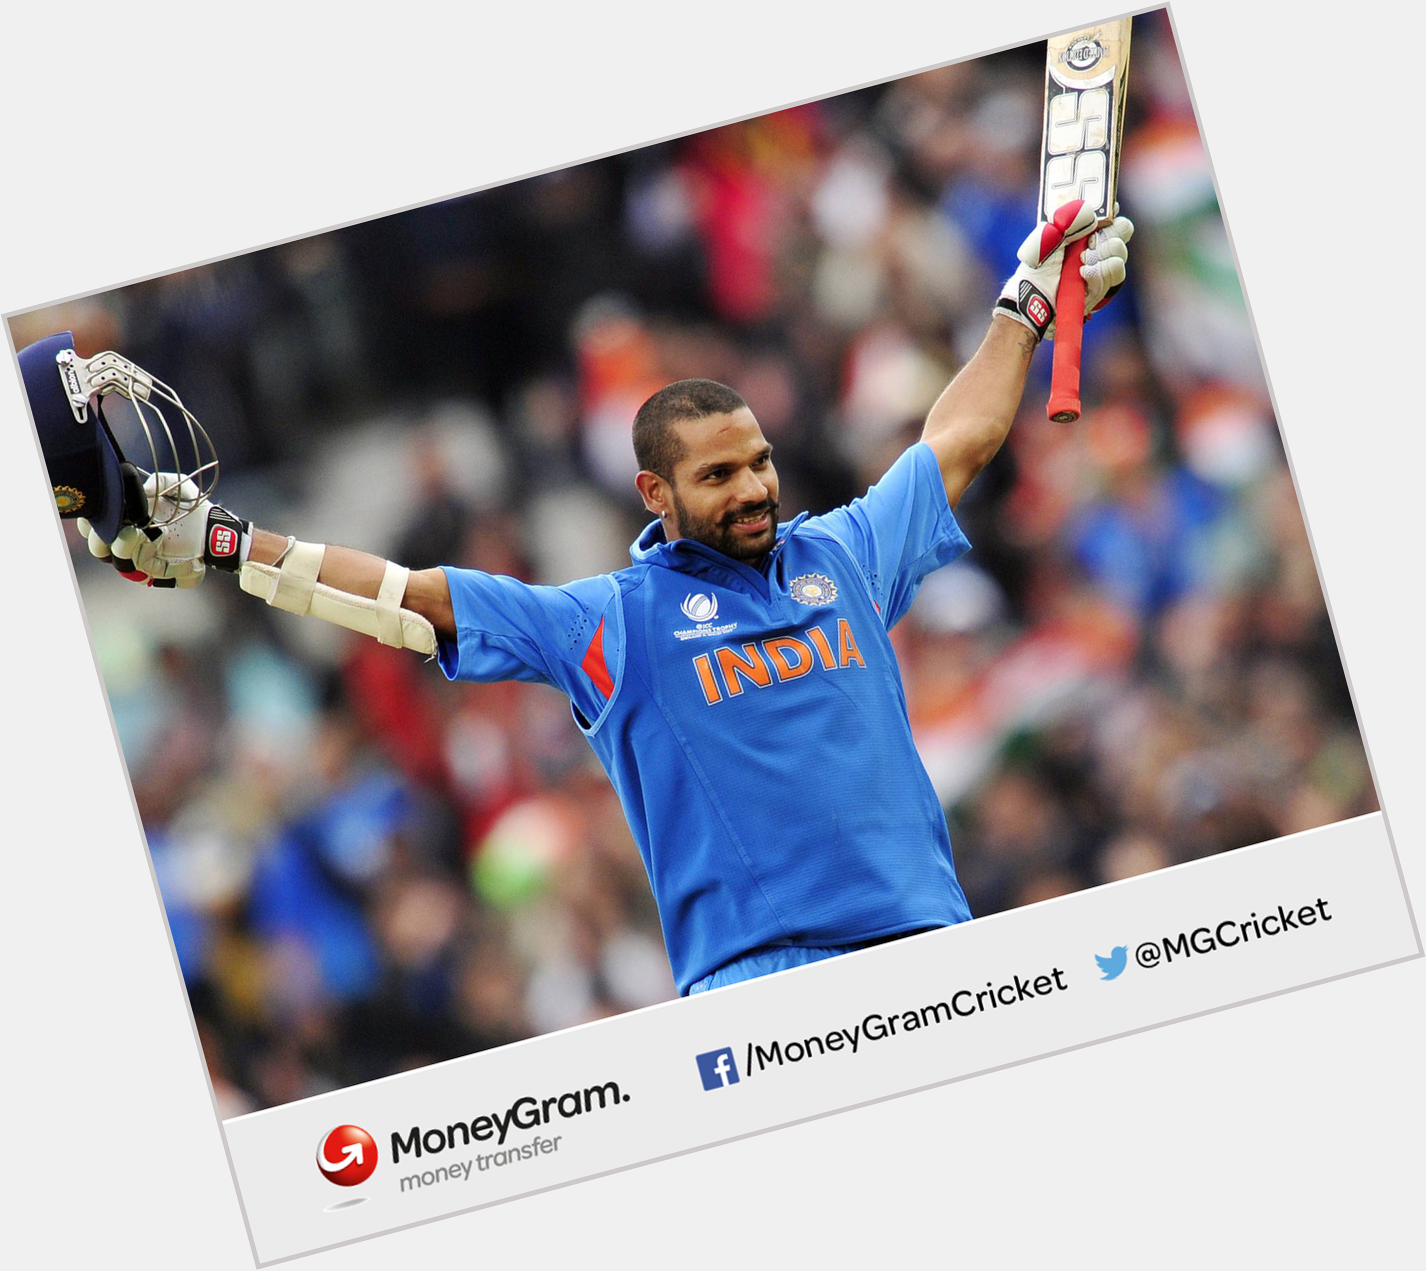 Happy birthday Shikhar Dhawan! The 29 year old has had a great week, making it into provisional squad! 